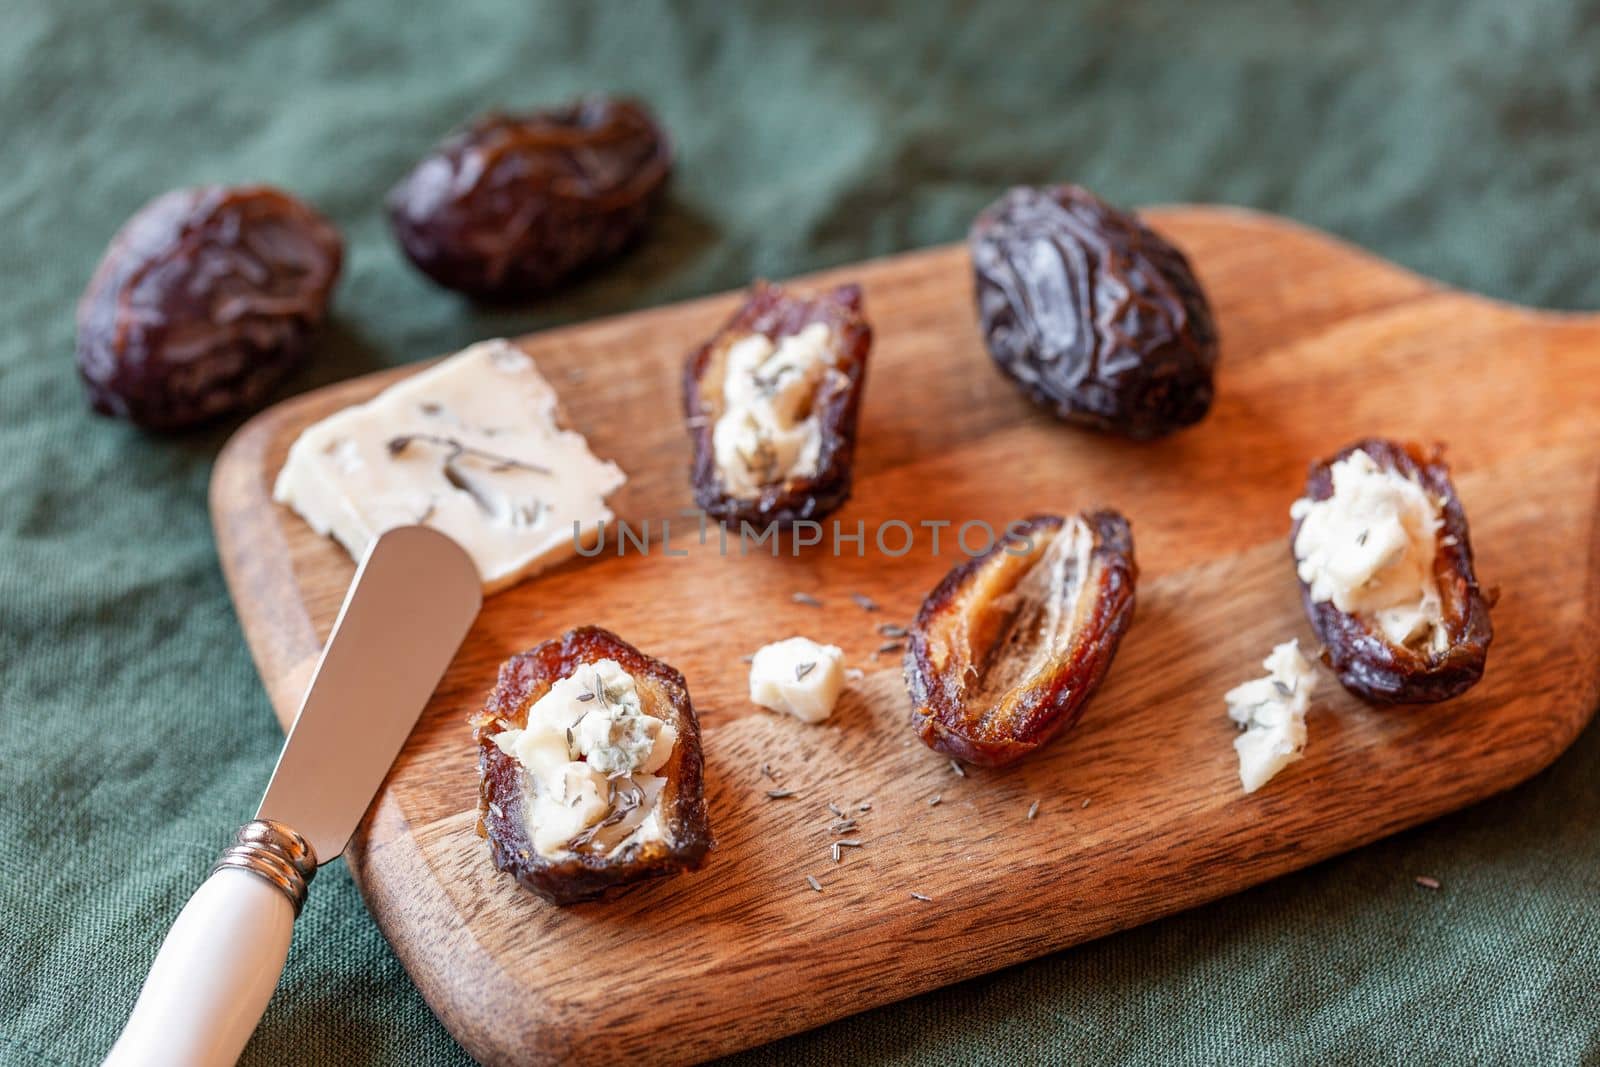 Date fruits stuffed with gorgonzola soft cheese by lanych